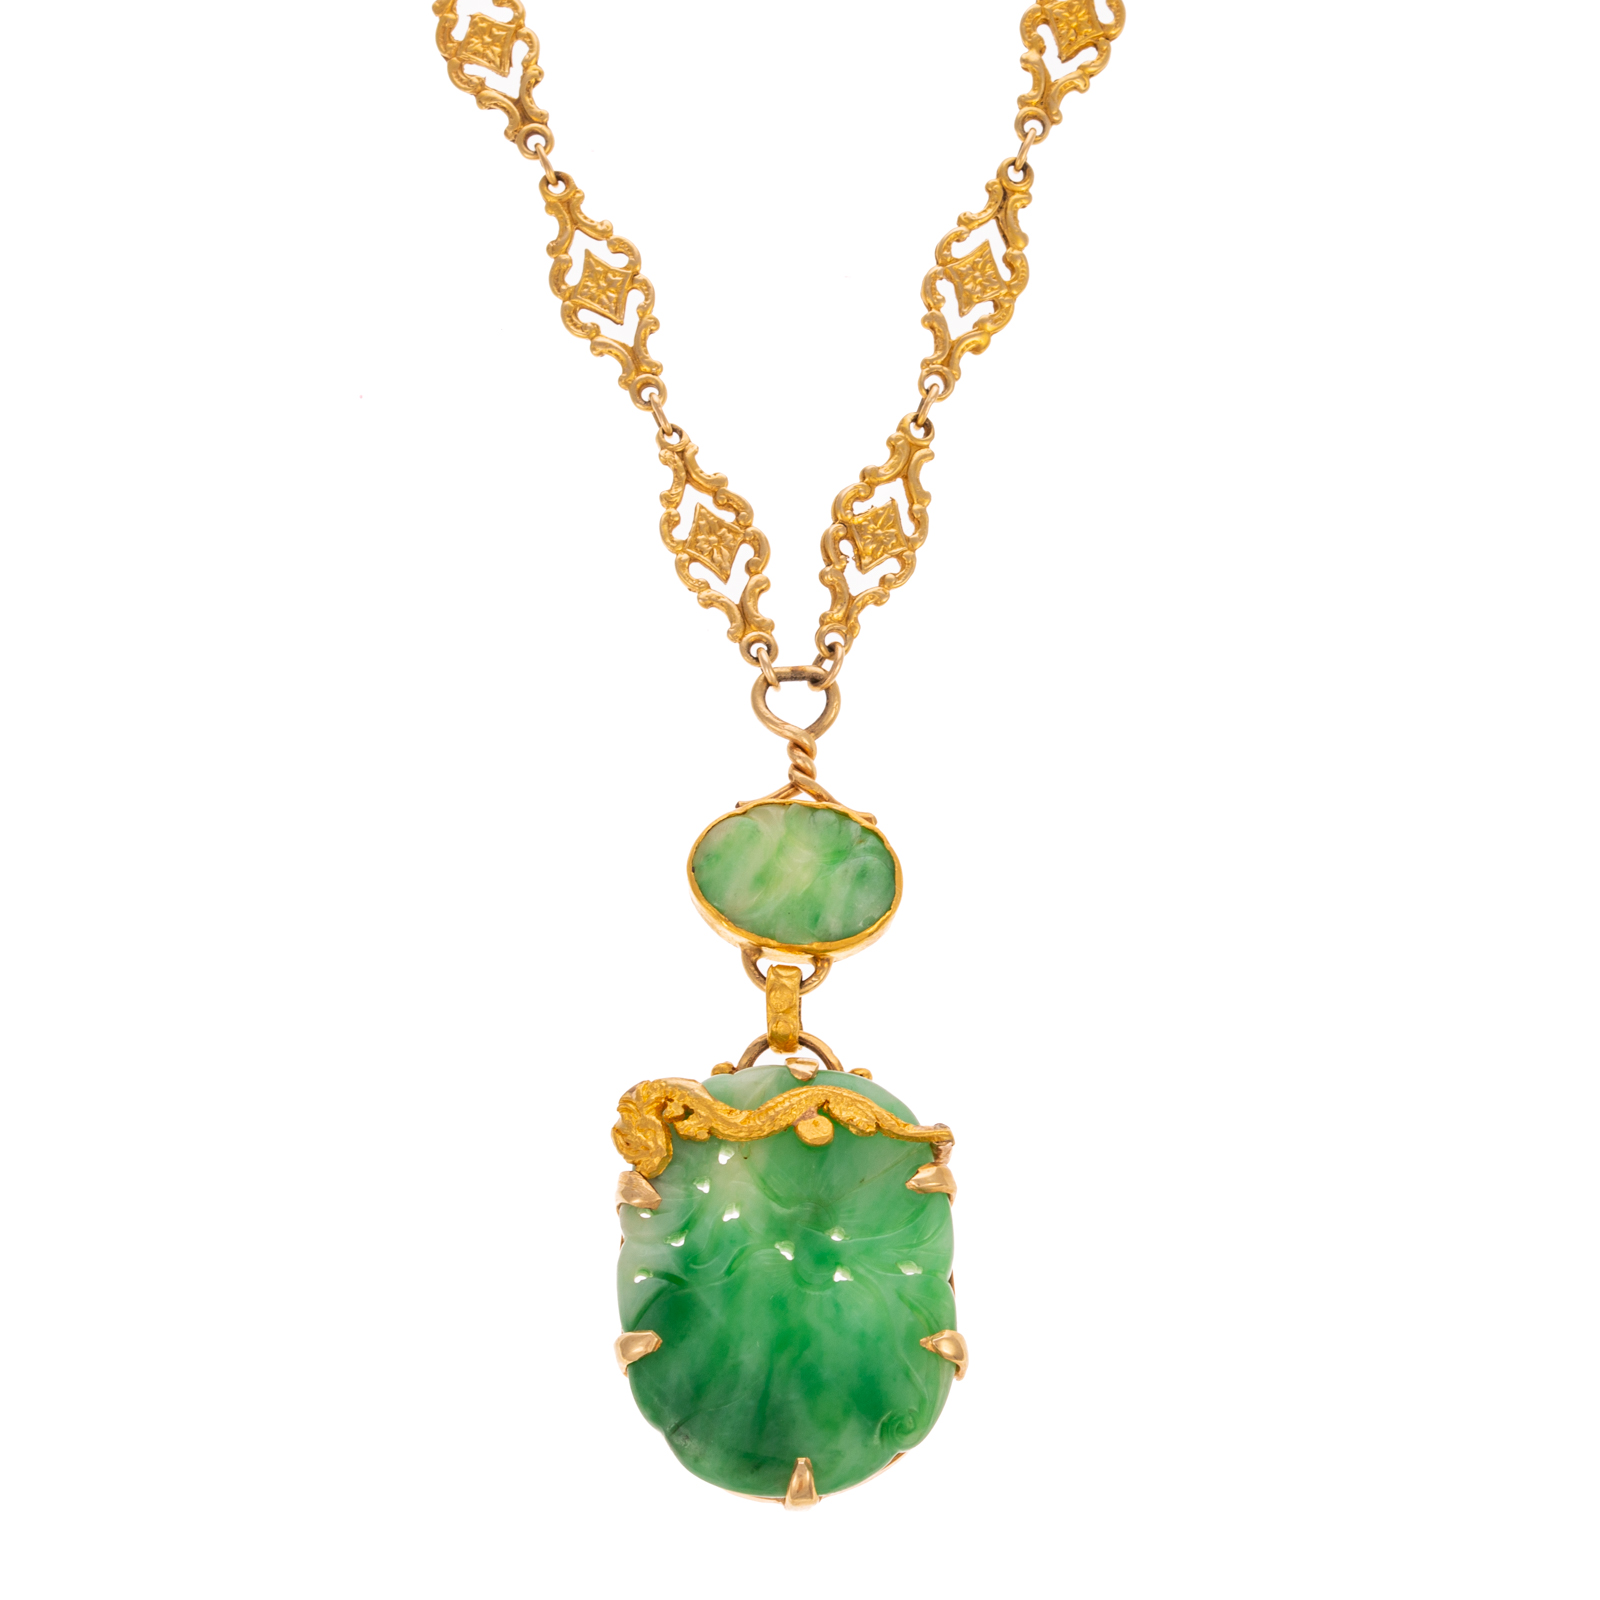 A 14K CARVED JADE NECKLACE WITH 33852a